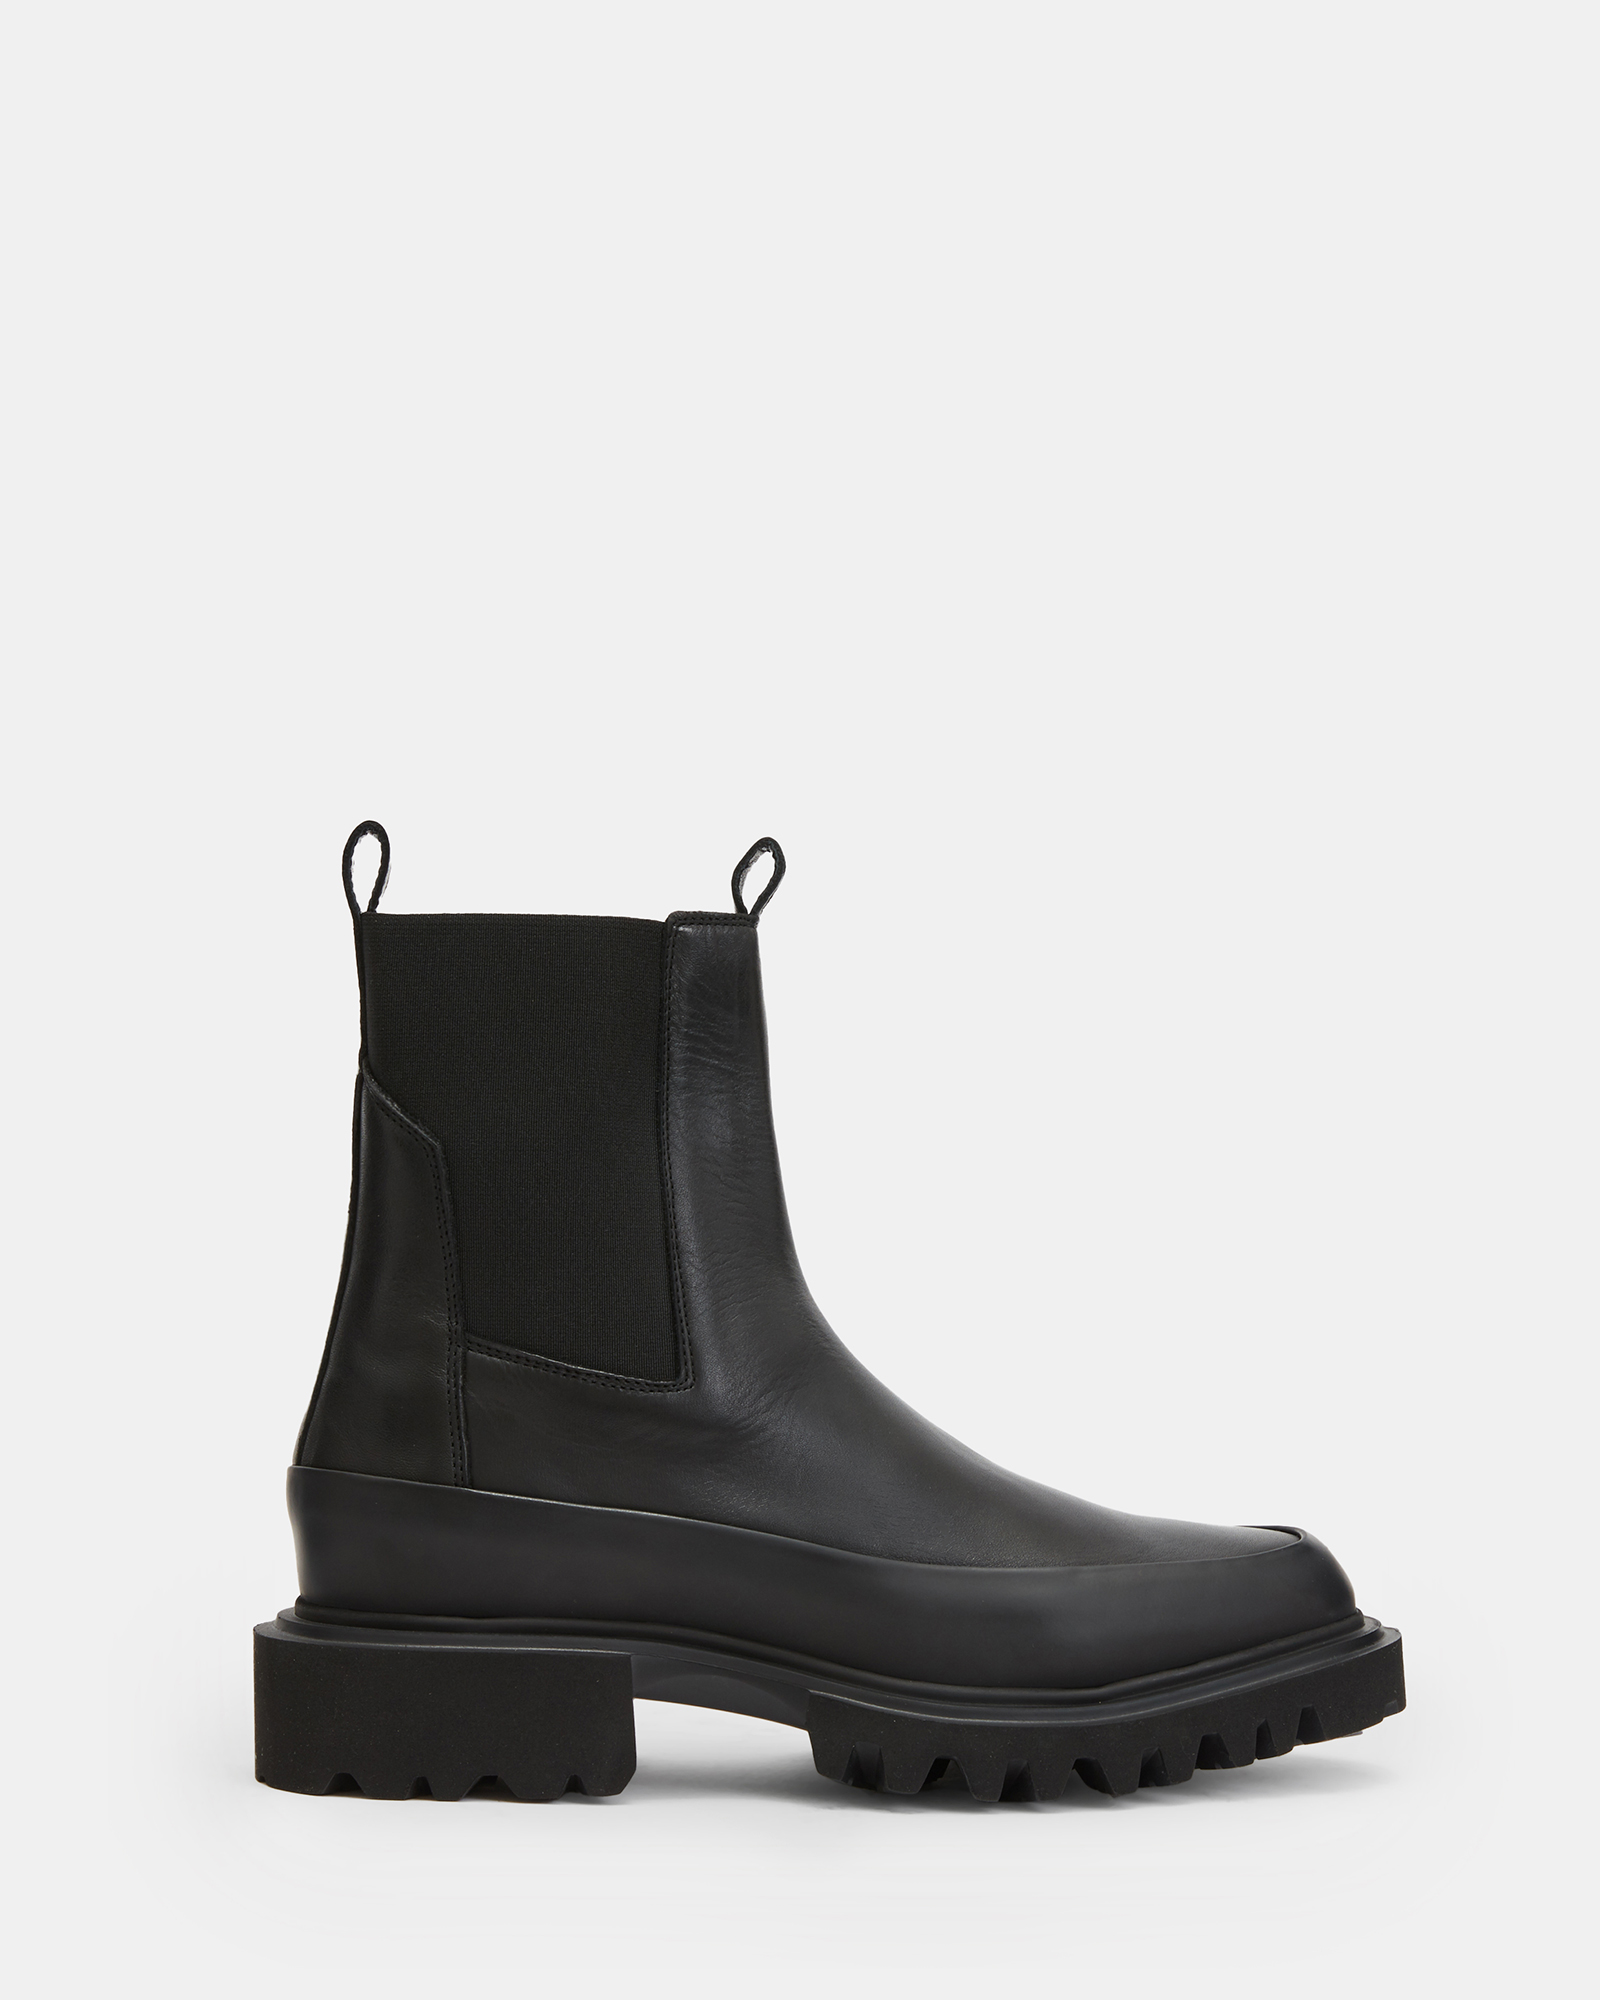 AllSaints Harlee Chunky Leather Boots,, Black